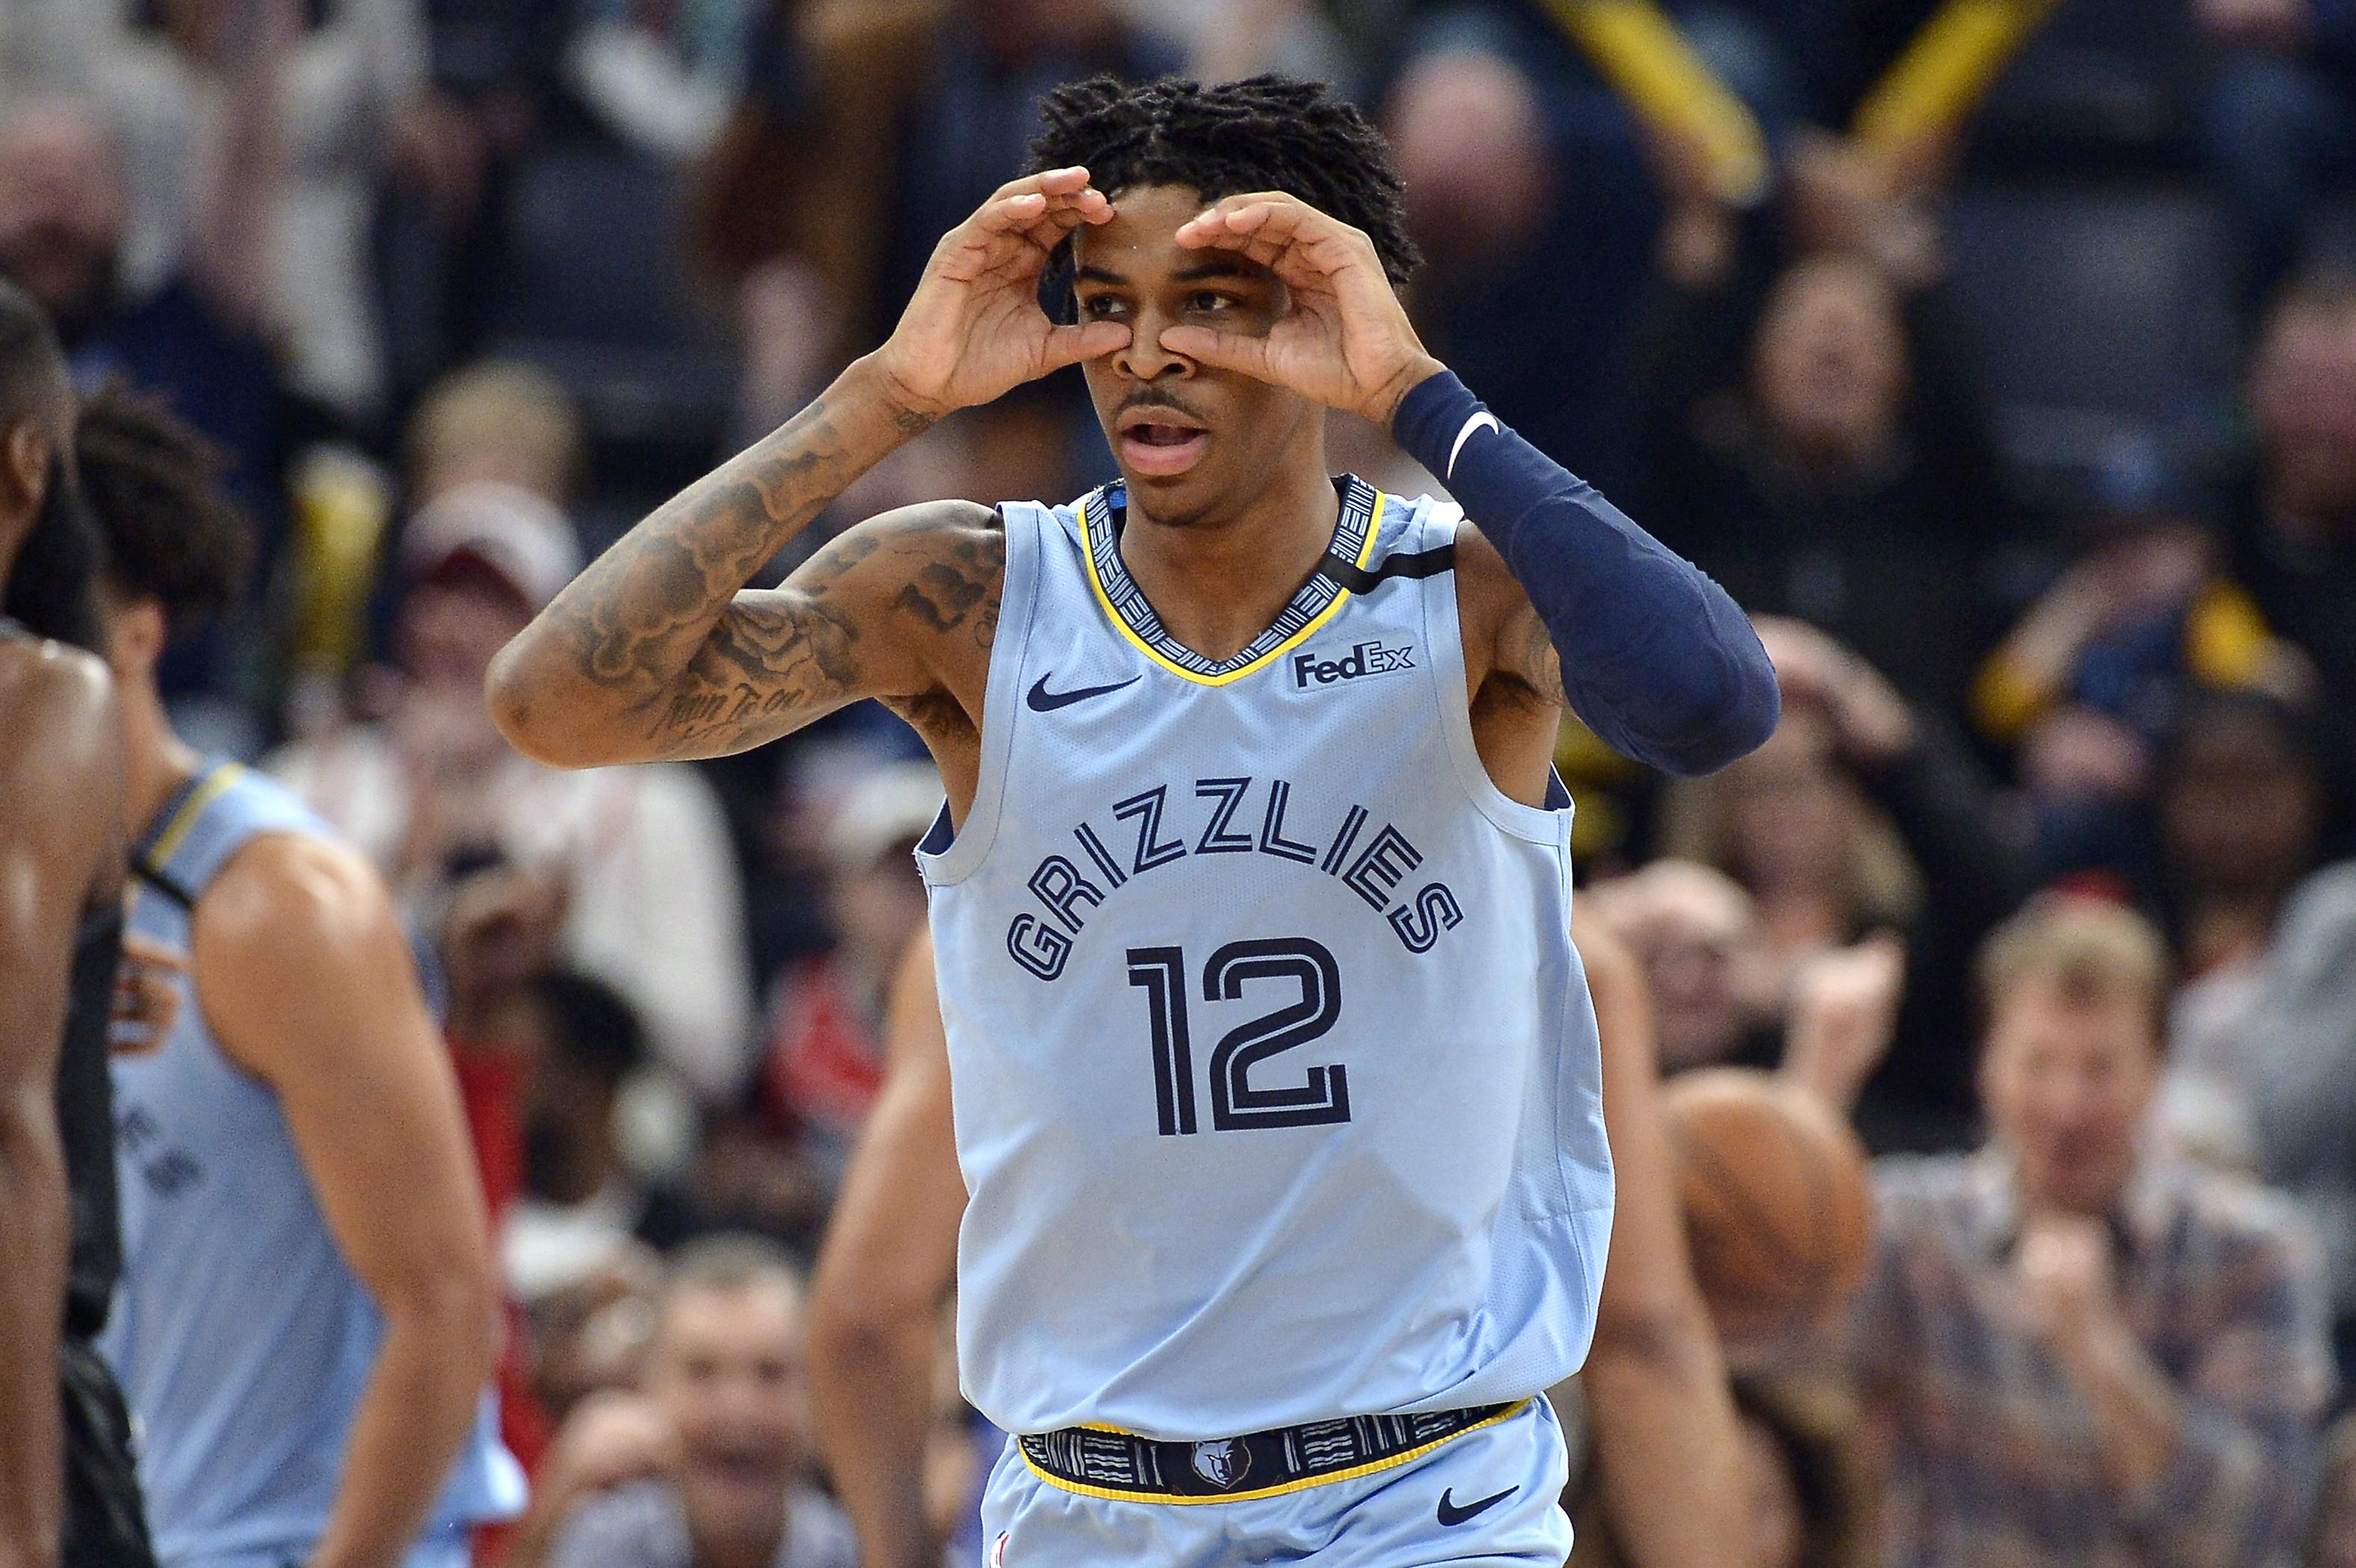 NBA roundup Ja Morant leads Grizzlies past Rockets 121110 for 6th